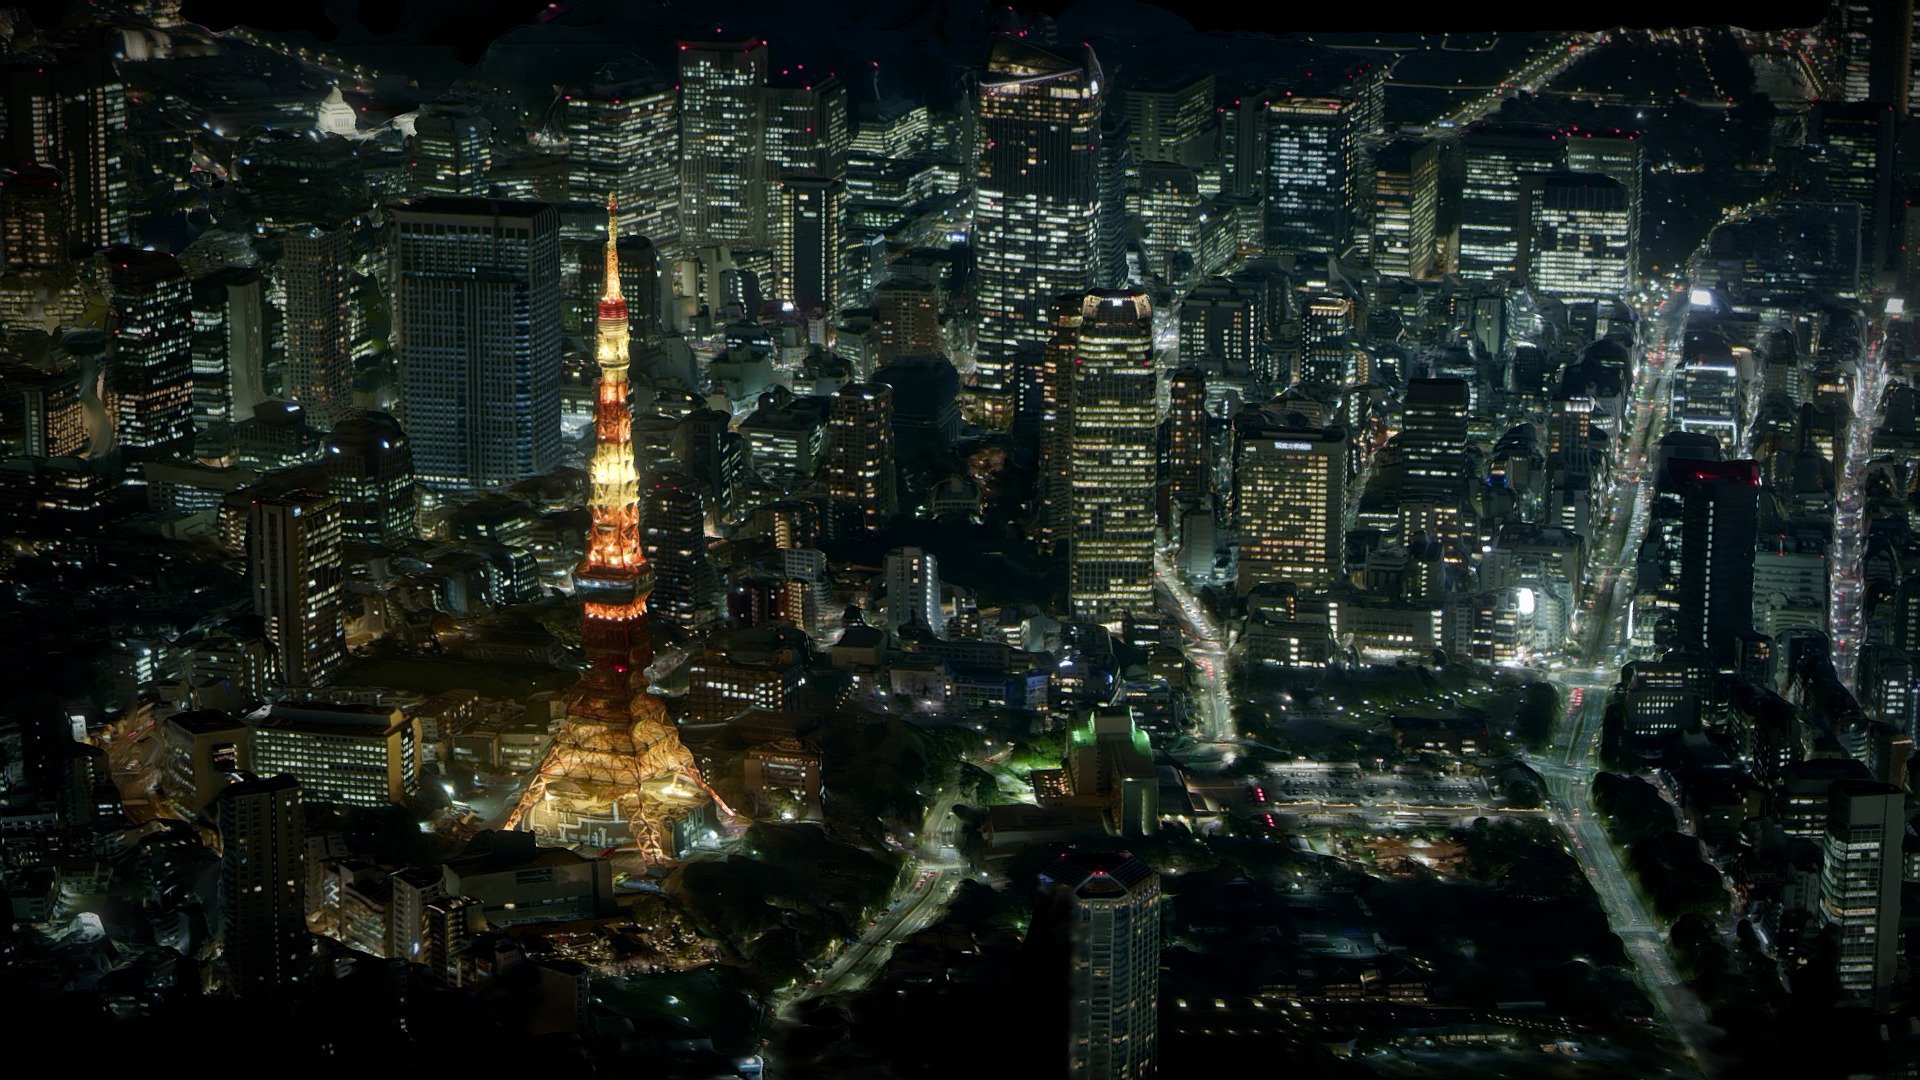 Tokyo Night Download Free 3d Model By Nikitos 3130 Vrcityphoto 9a